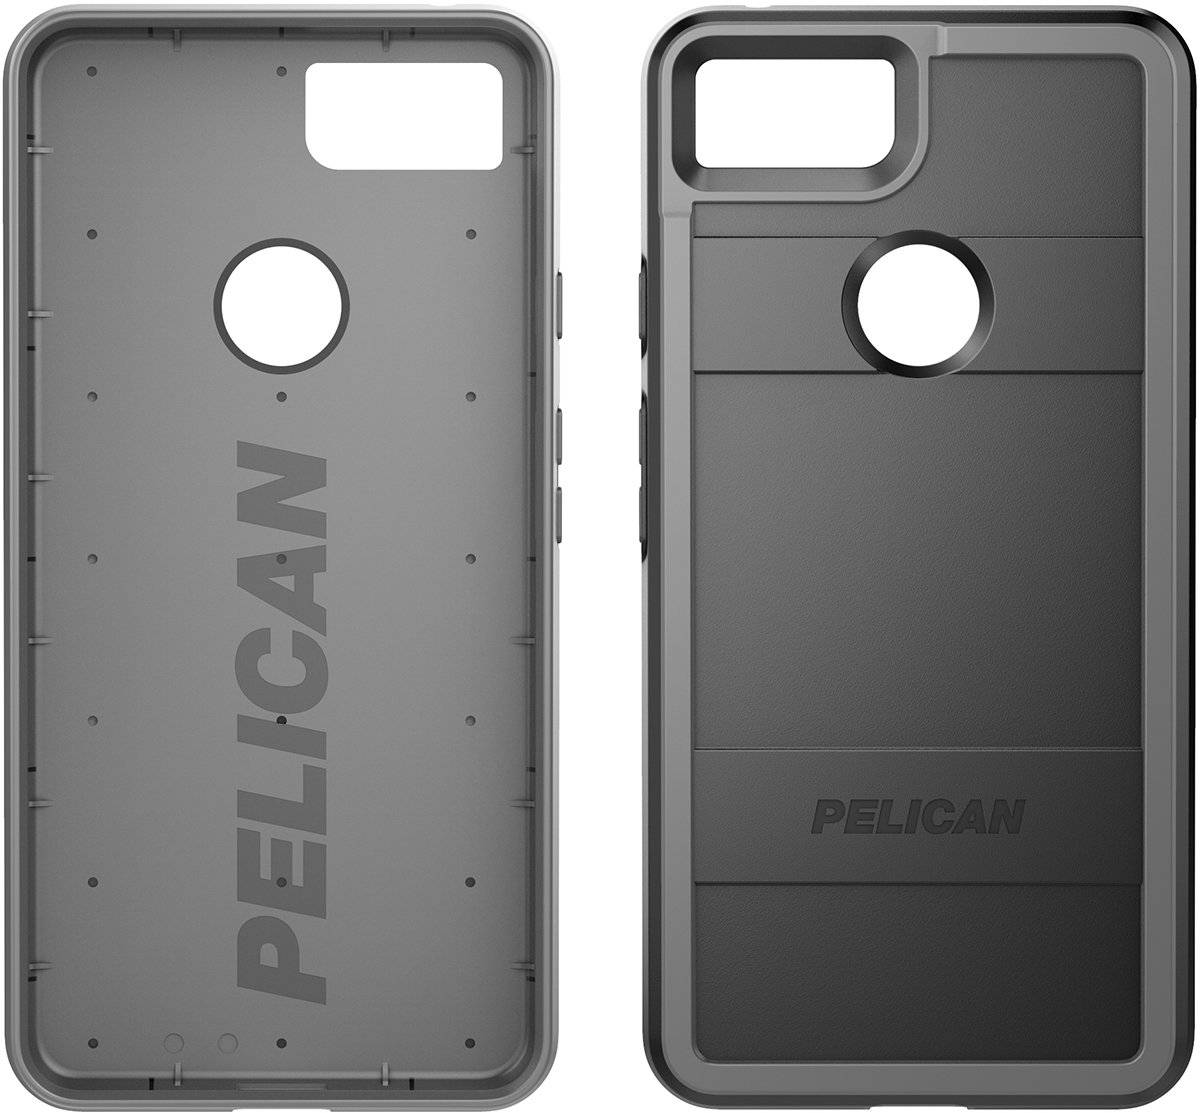 Pelican Products Launches New Protector Phone Case for the Google Pixel™ 3 and 3 XL